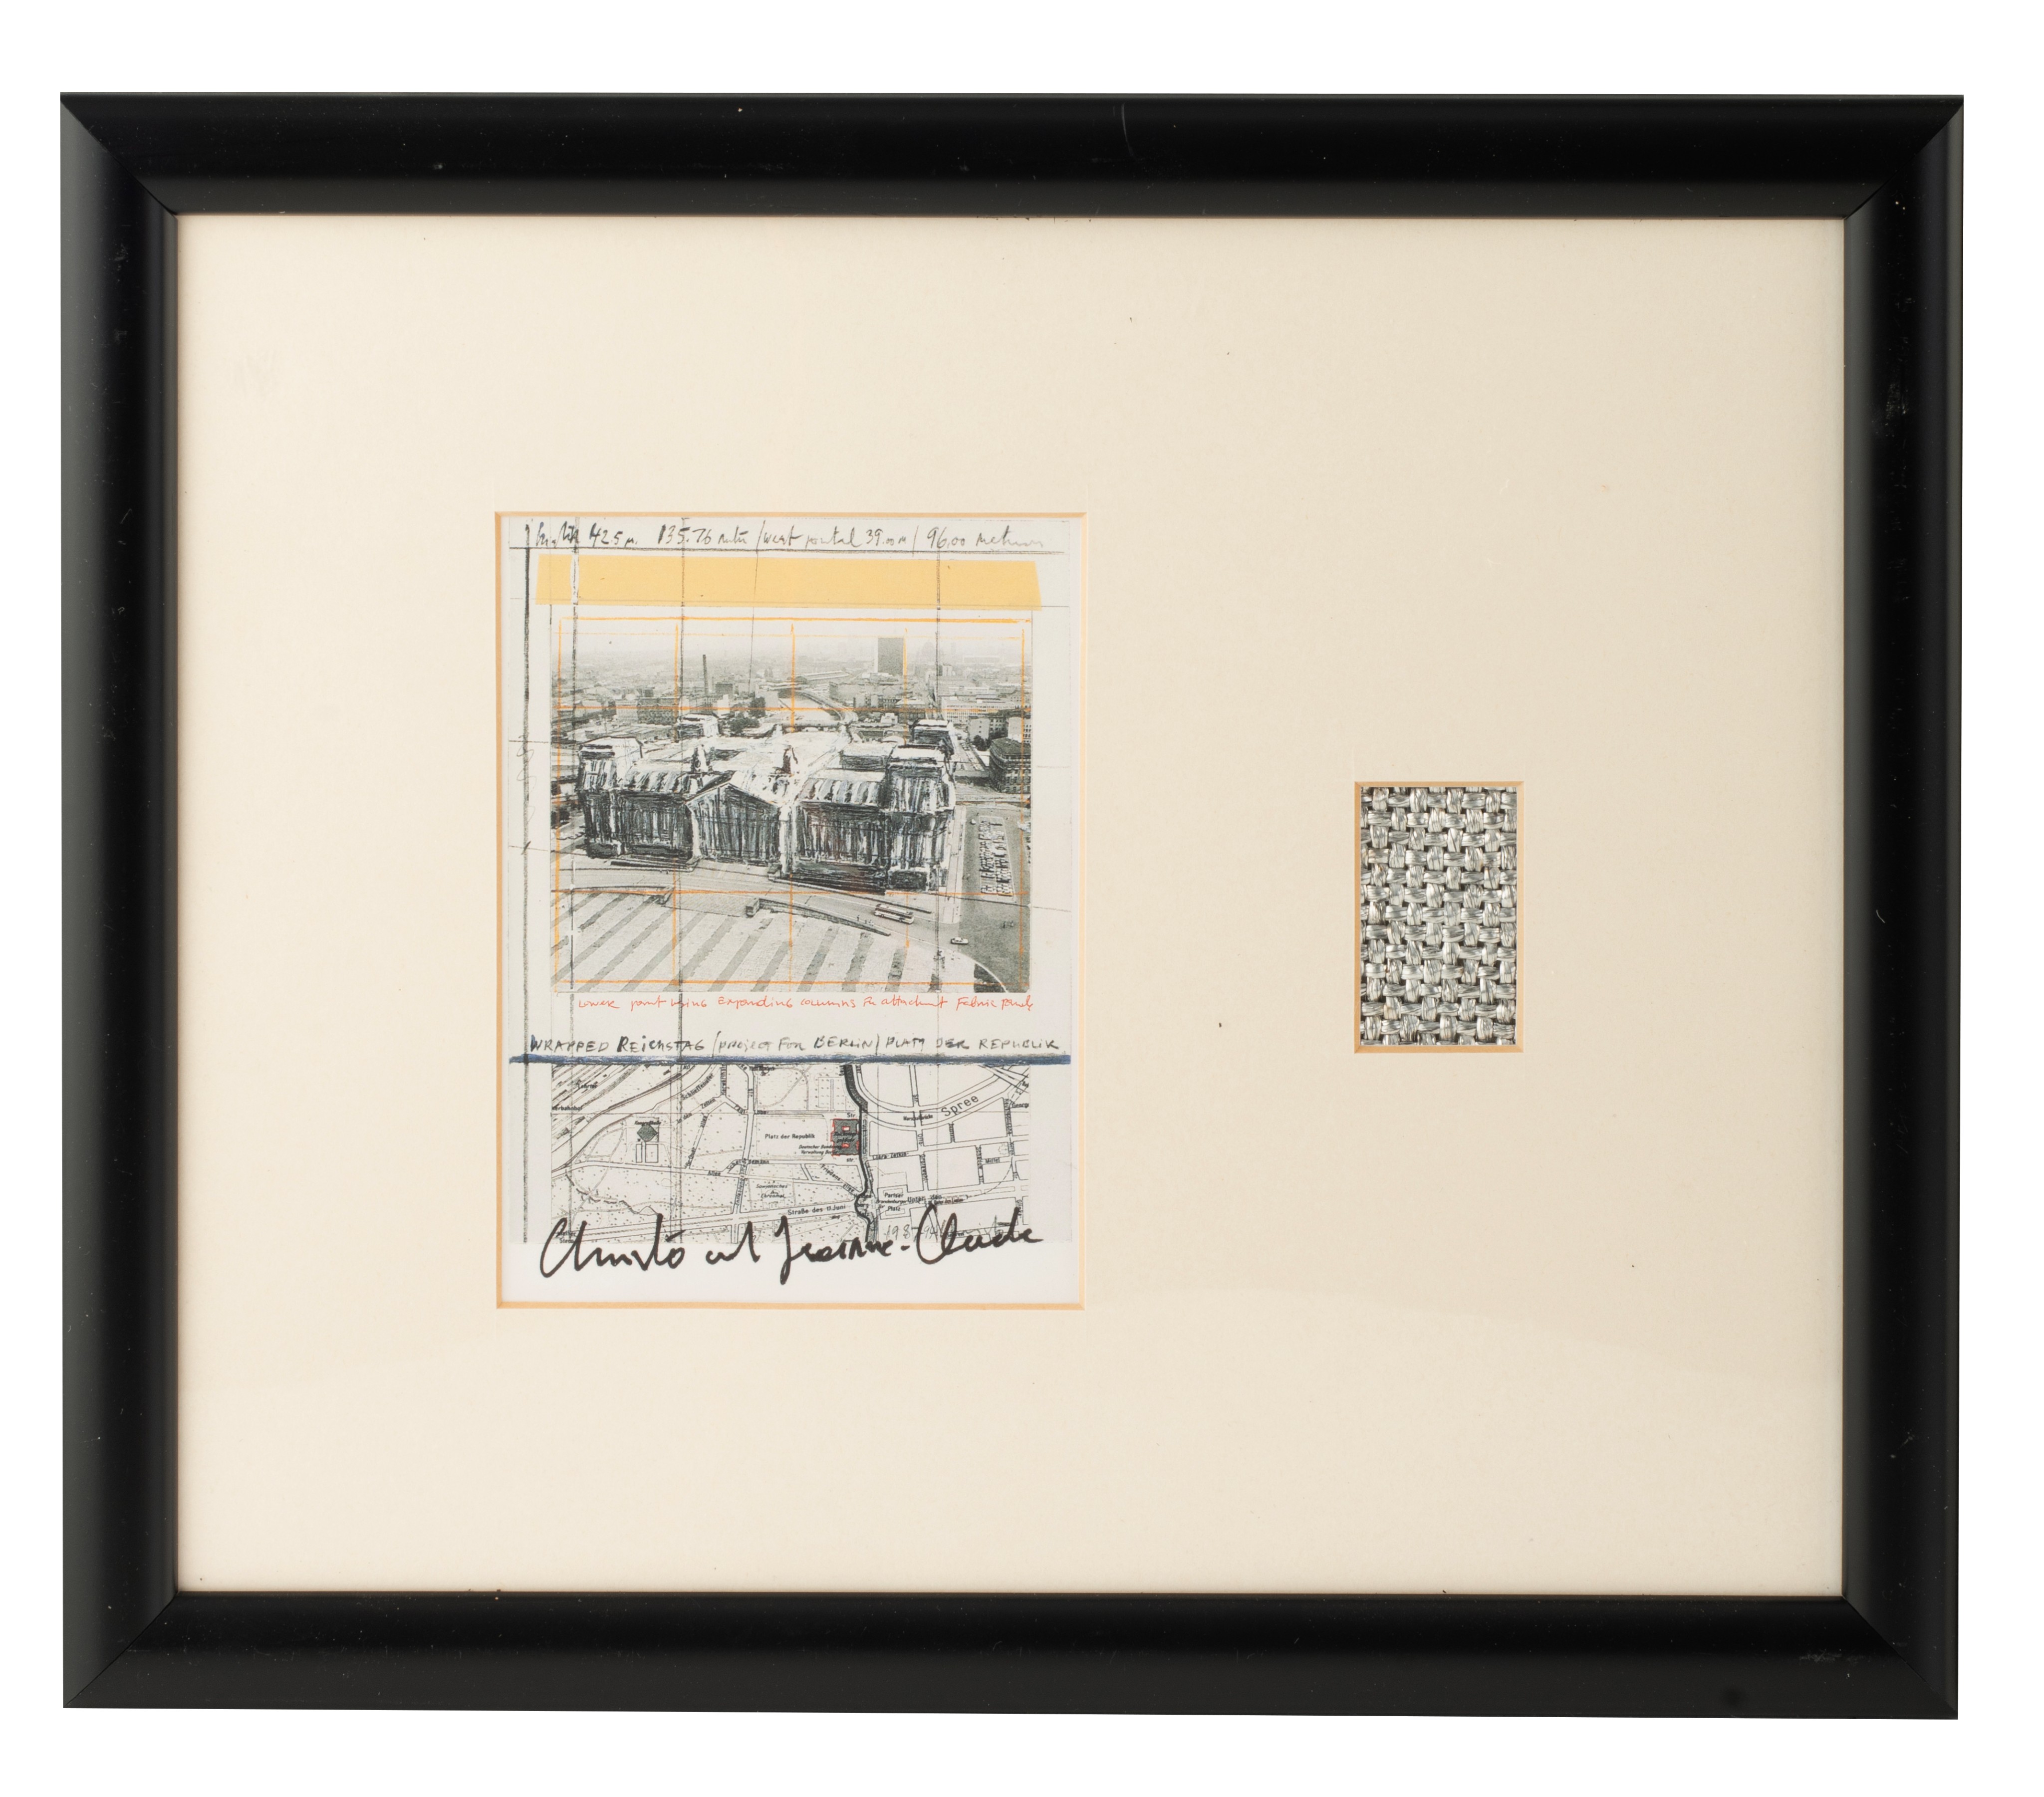 (BIDDING ONLY ON CARLOBONTE.BE) Christo and Jeanne-Claude, three signed offsets of their famous proj - Image 6 of 8